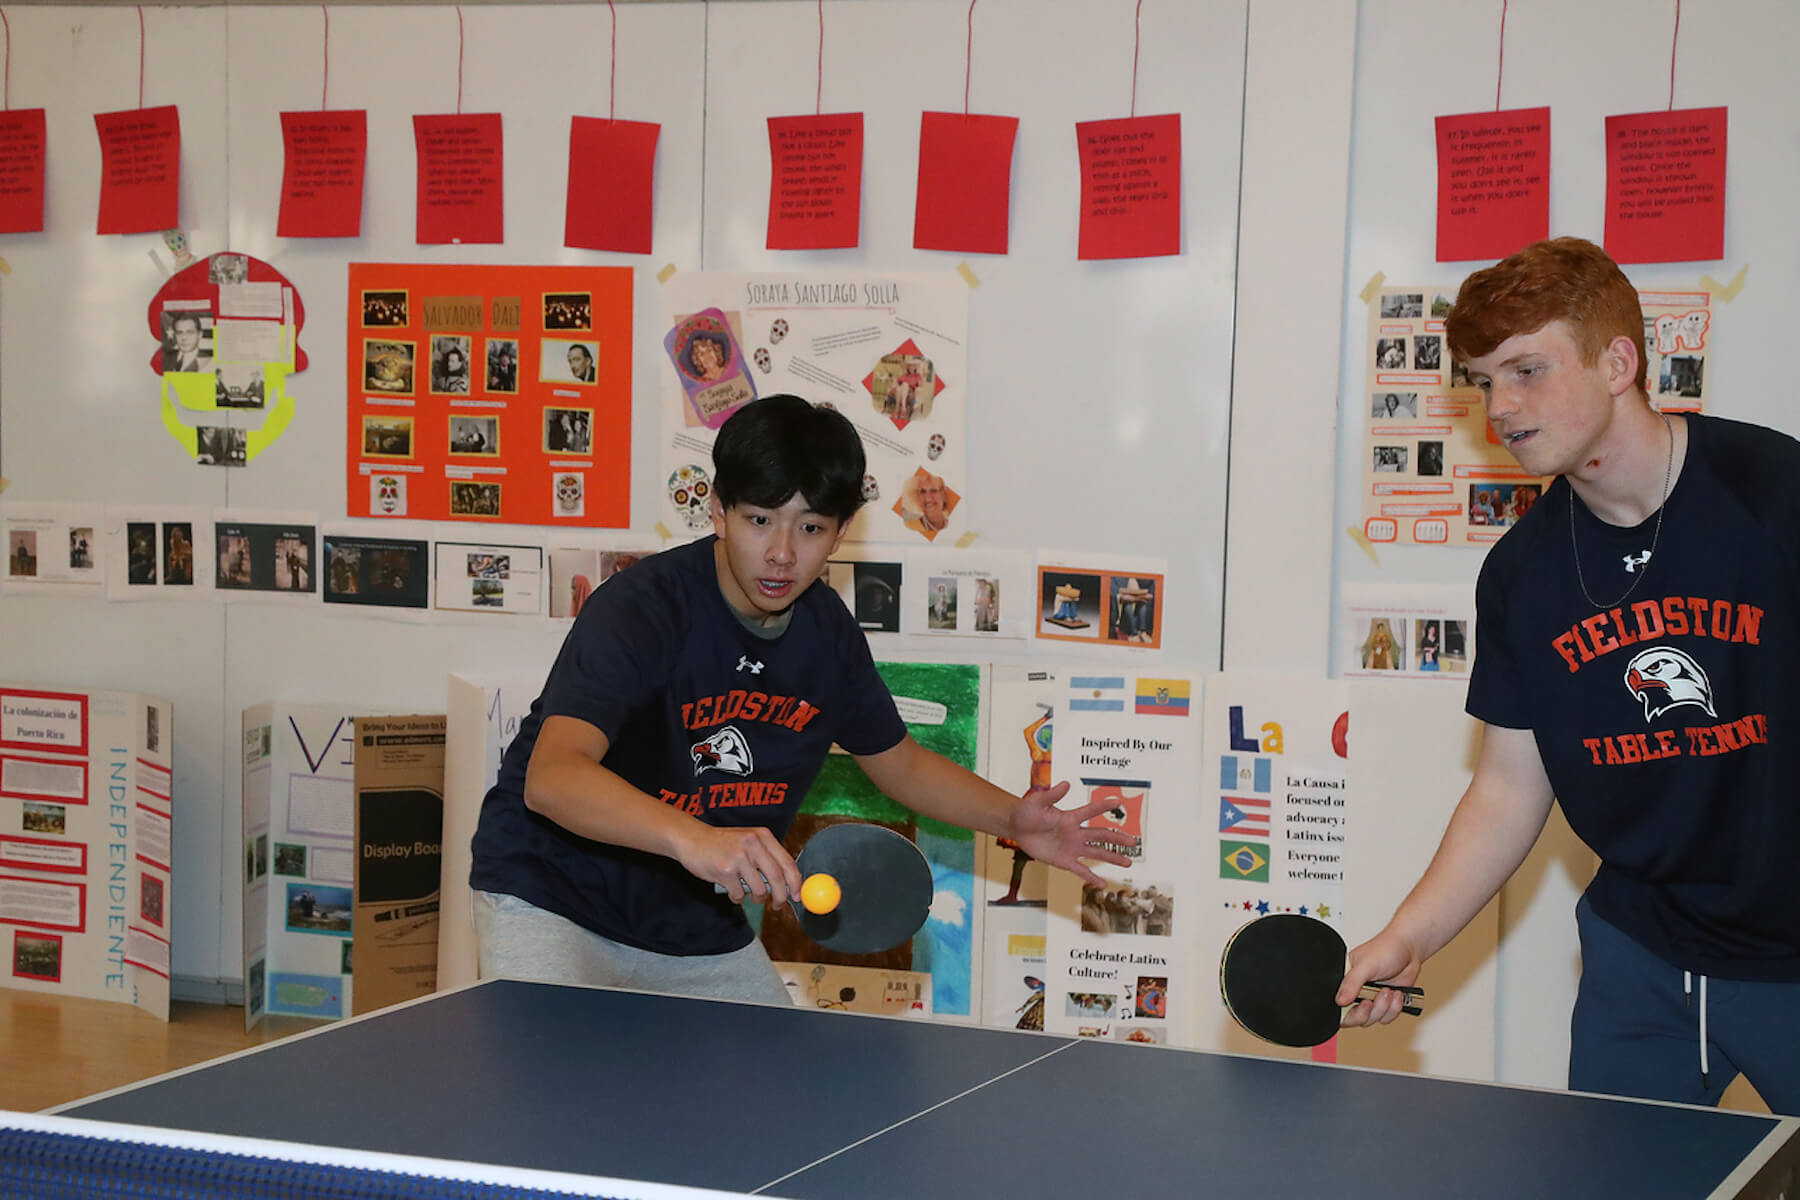 Two Fieldston Lower table tennis players compete in match. One student hits a yellow/orange ping pong ball while the other looks on, paddle raised.